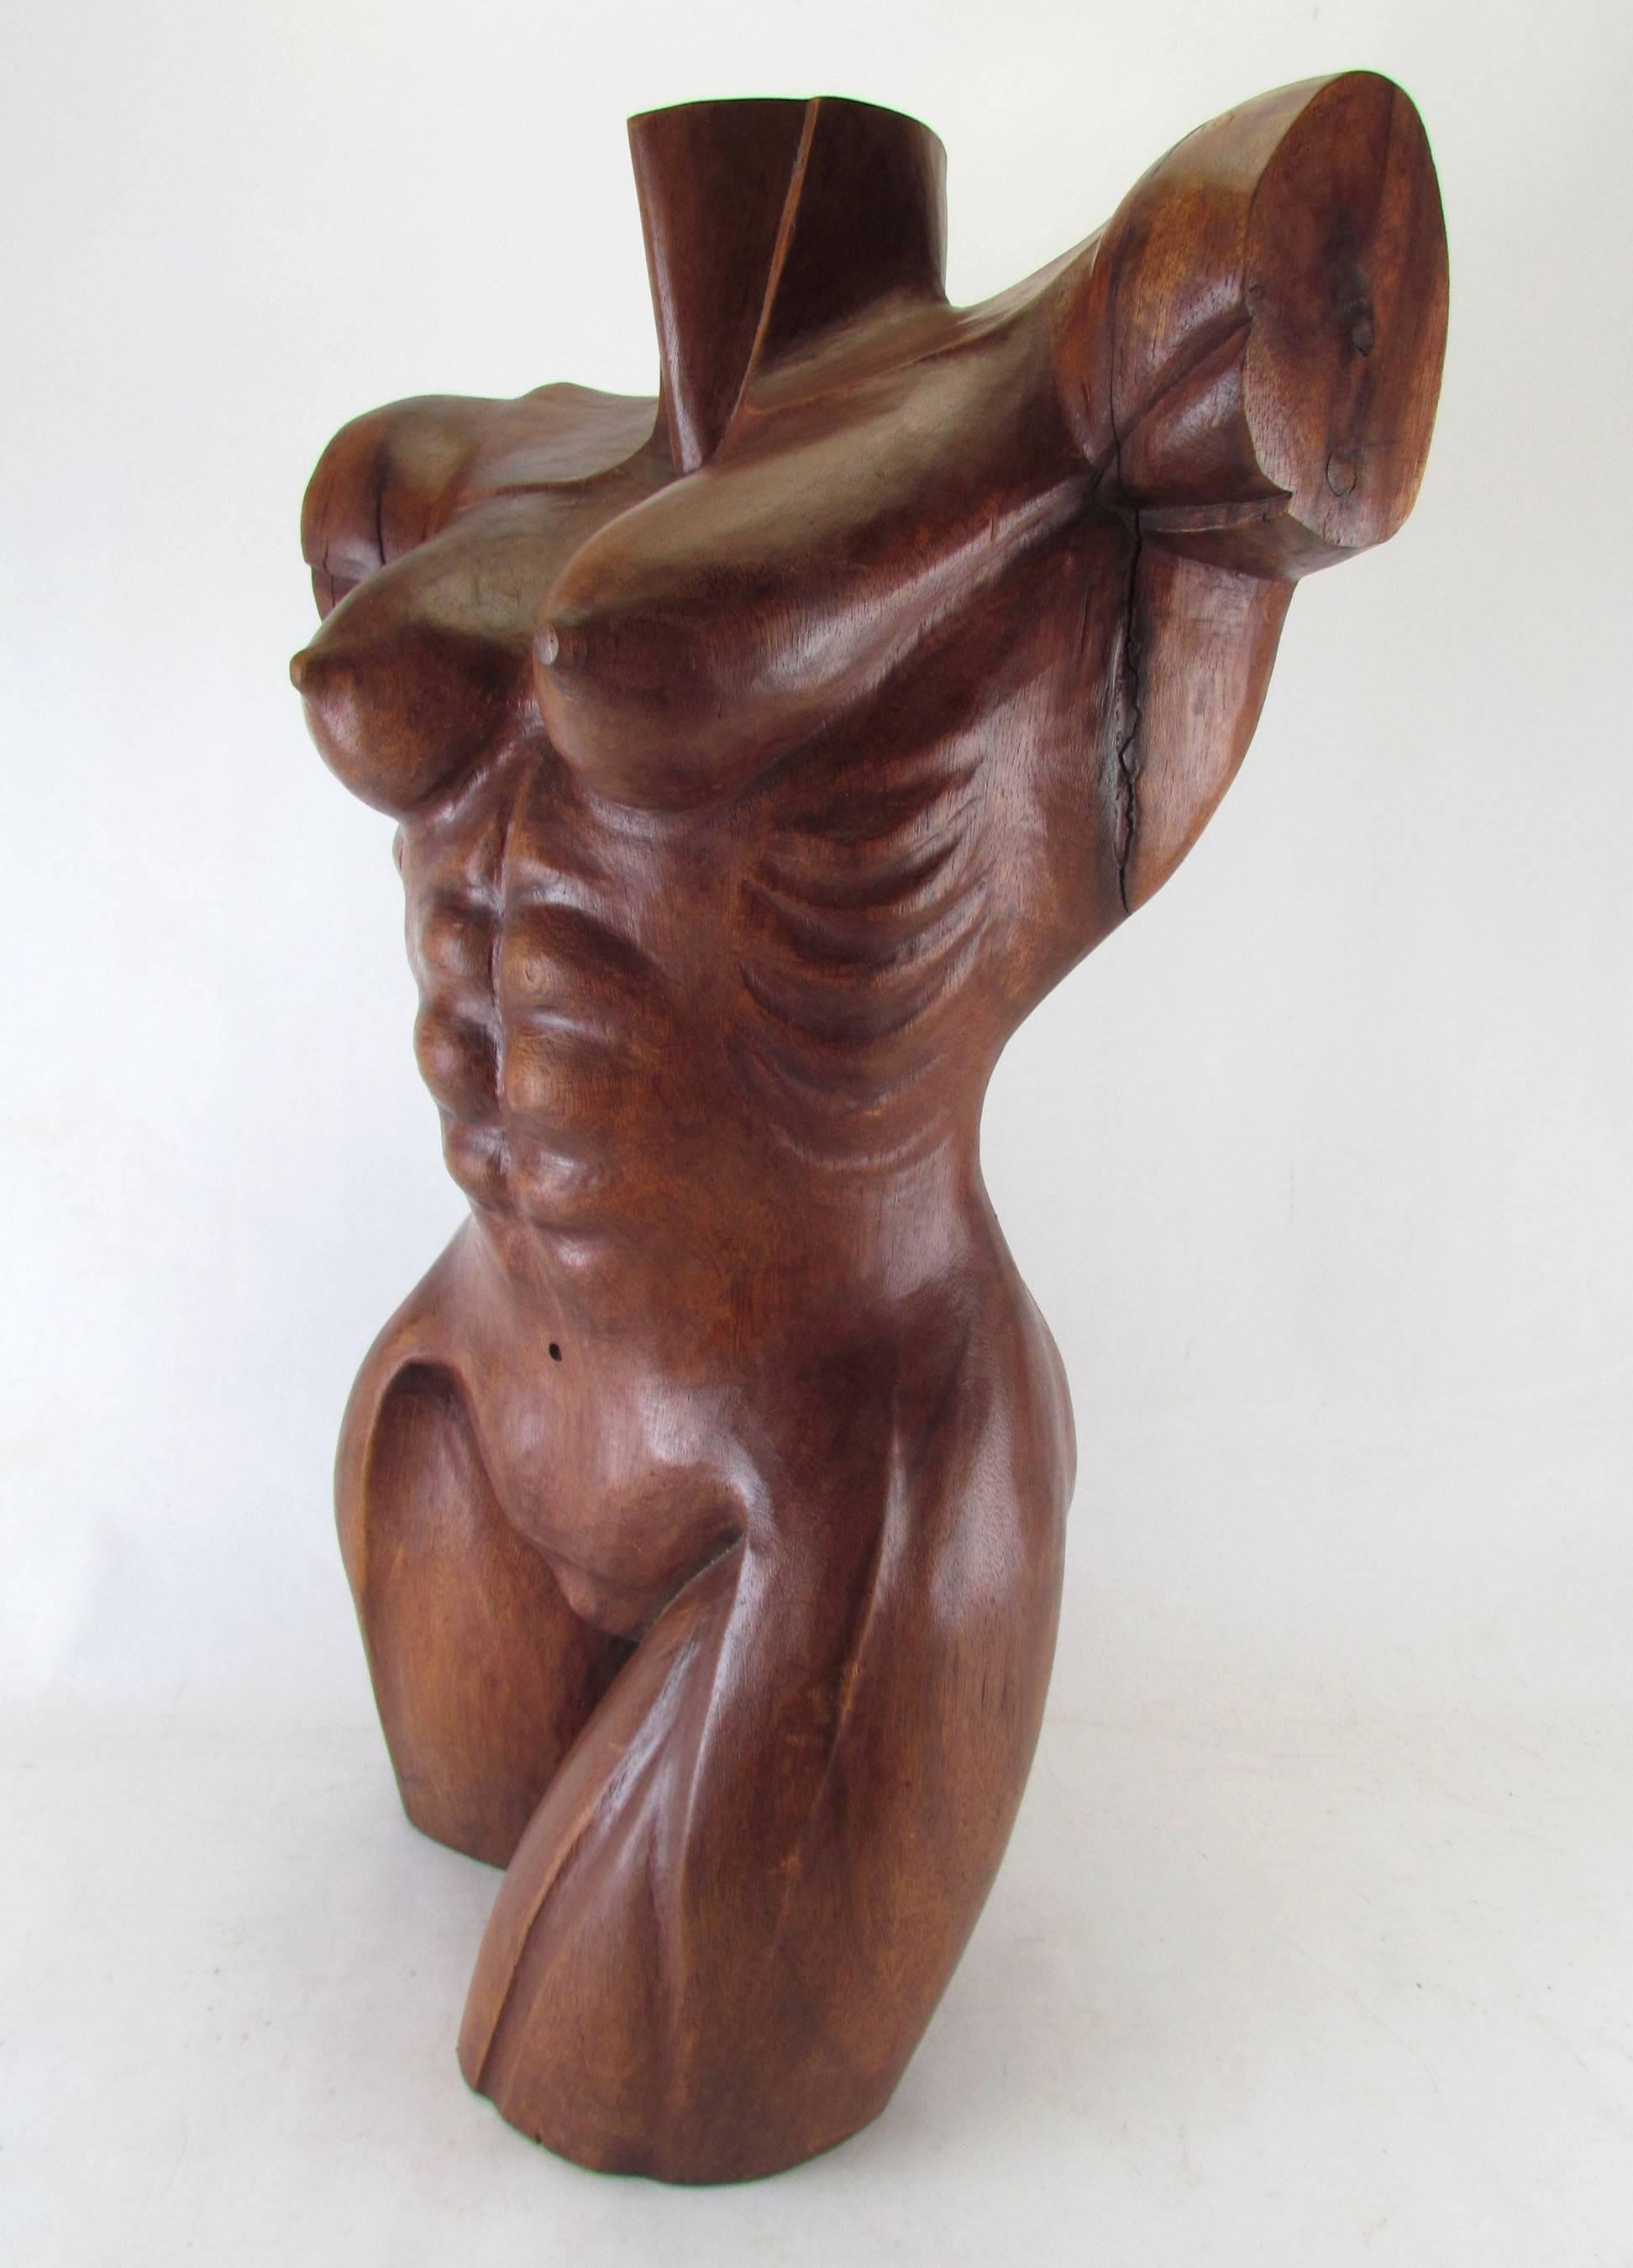 American Hand-Carved Wood Sculpture of a Toned Female Torso Signed Lydon, Dated 1982